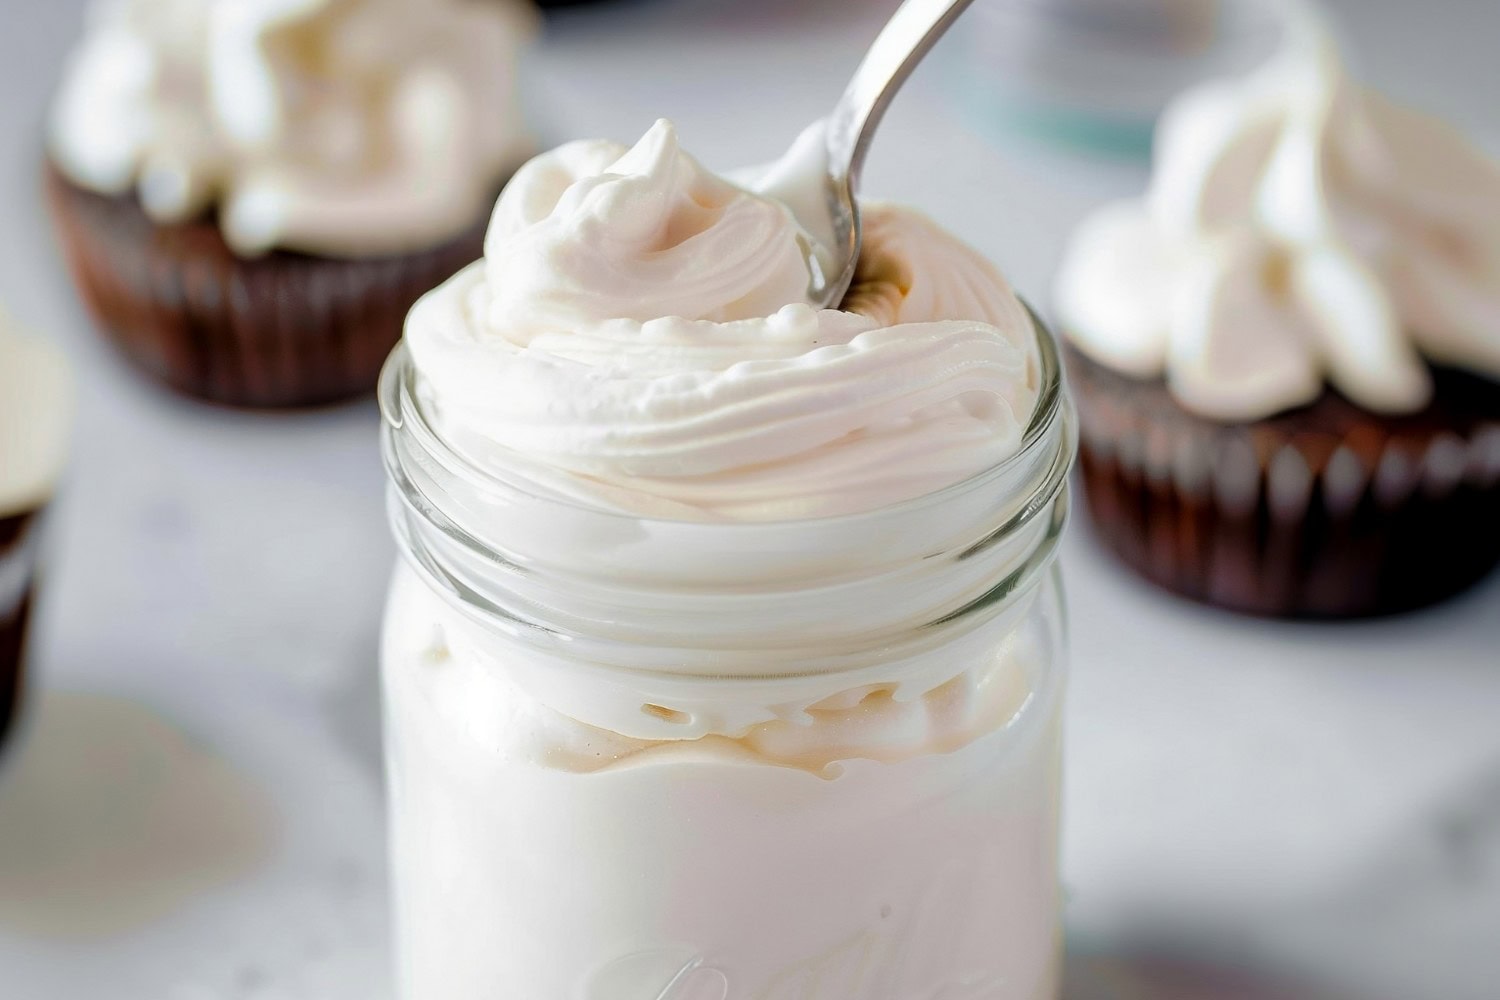 Heavenly marshmallow fluff, a nostalgic favorite that brings back memories of childhood treats